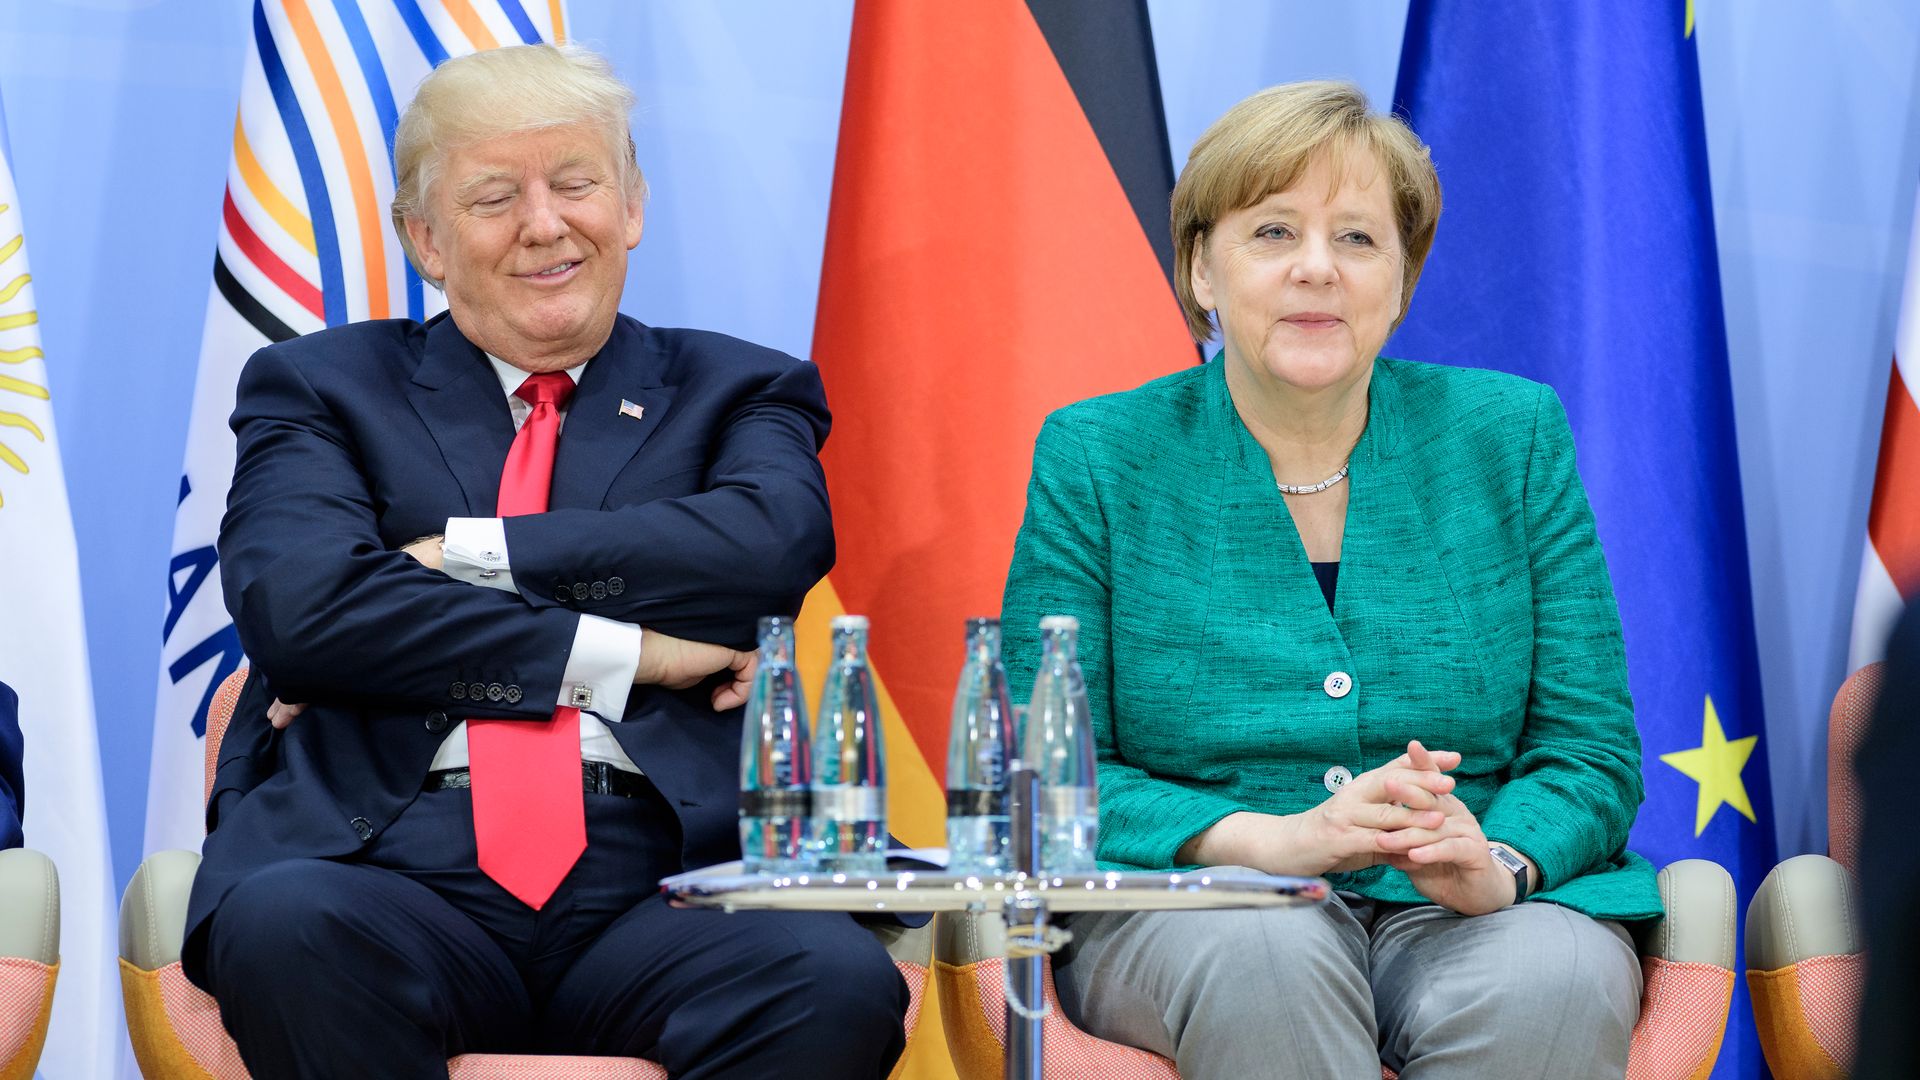 resident, Donald Trump and German Chancellor Angela Merkel attend a panel discussion titled 'Launch Event Women's Entrepreneur Finance Initiative'